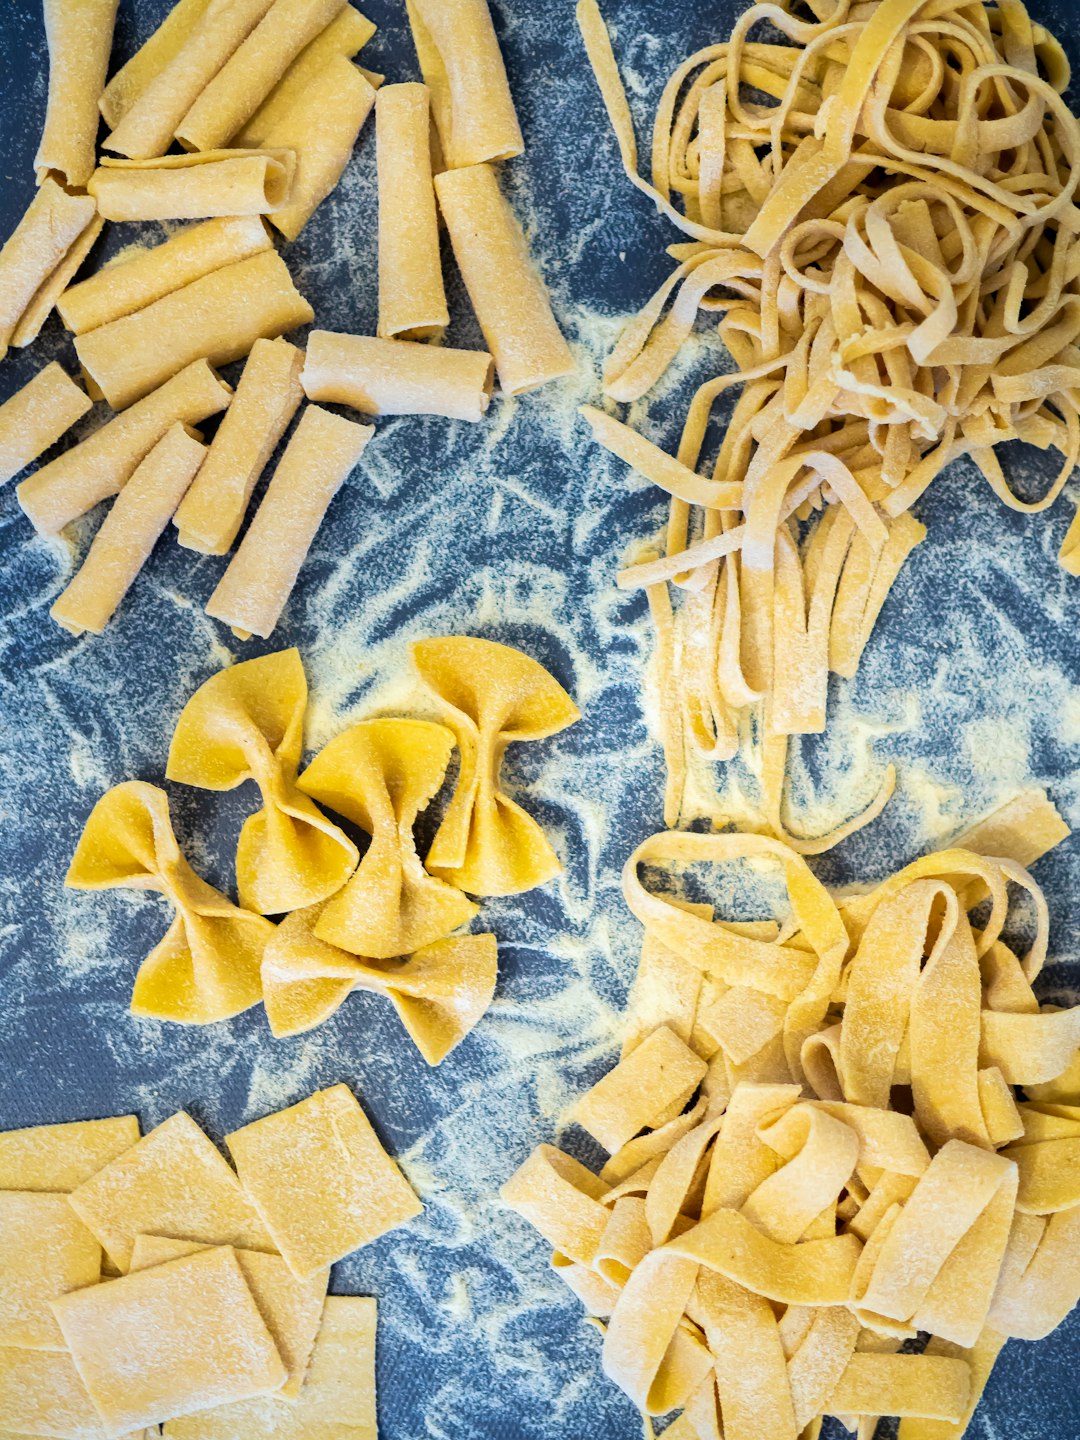 Home made pasta shapes - tagliatelle, farfalle, pappardelle 